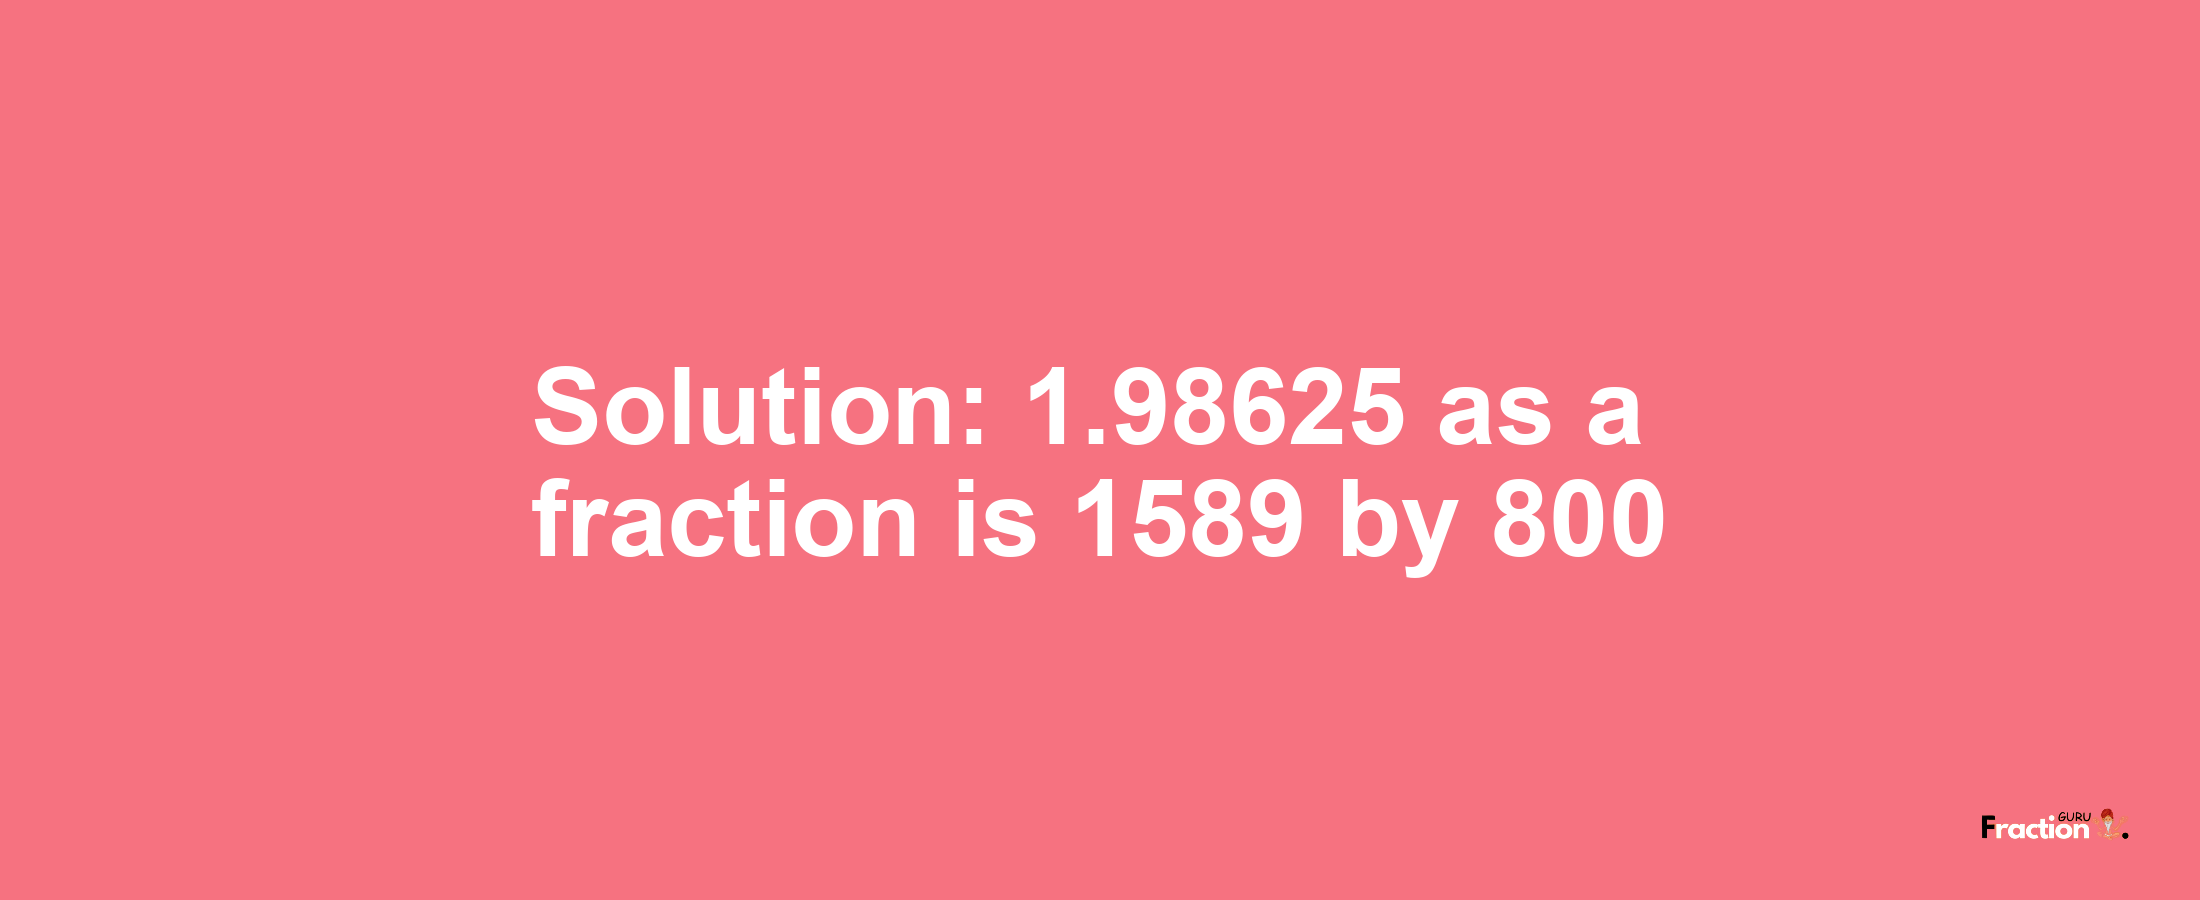 Solution:1.98625 as a fraction is 1589/800